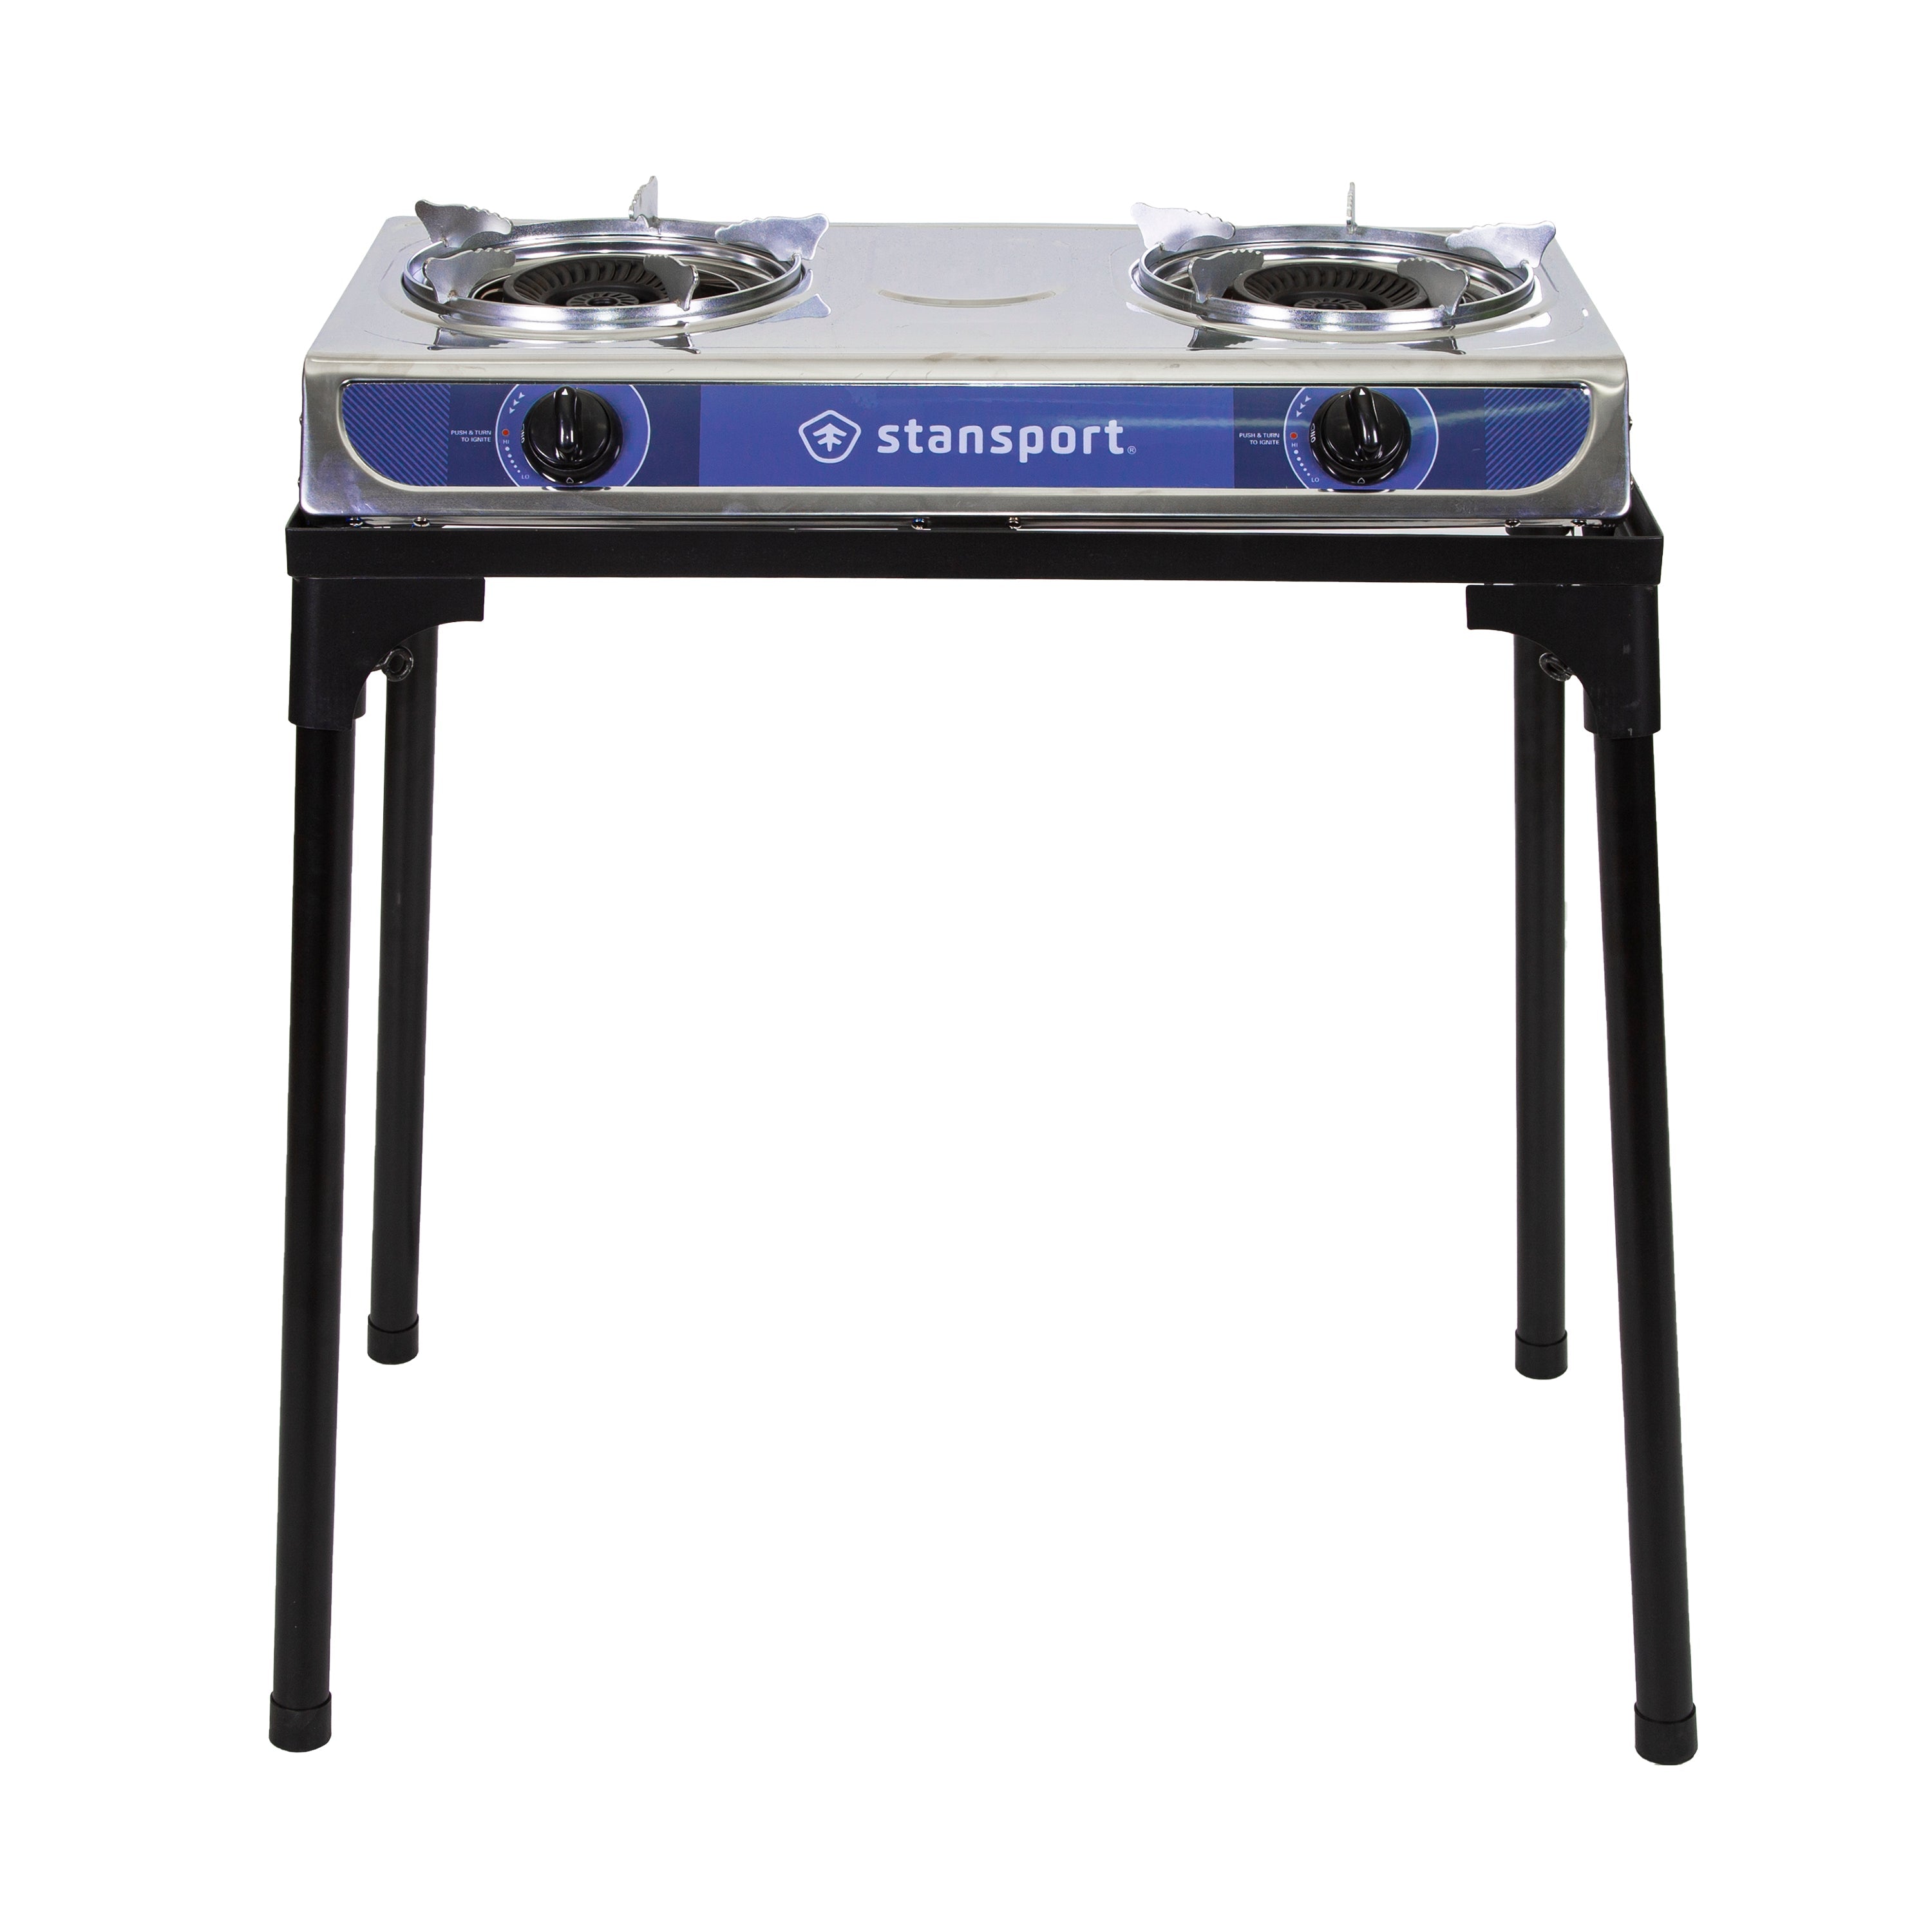 Stainless Steel 2 Burner Stove With Stand